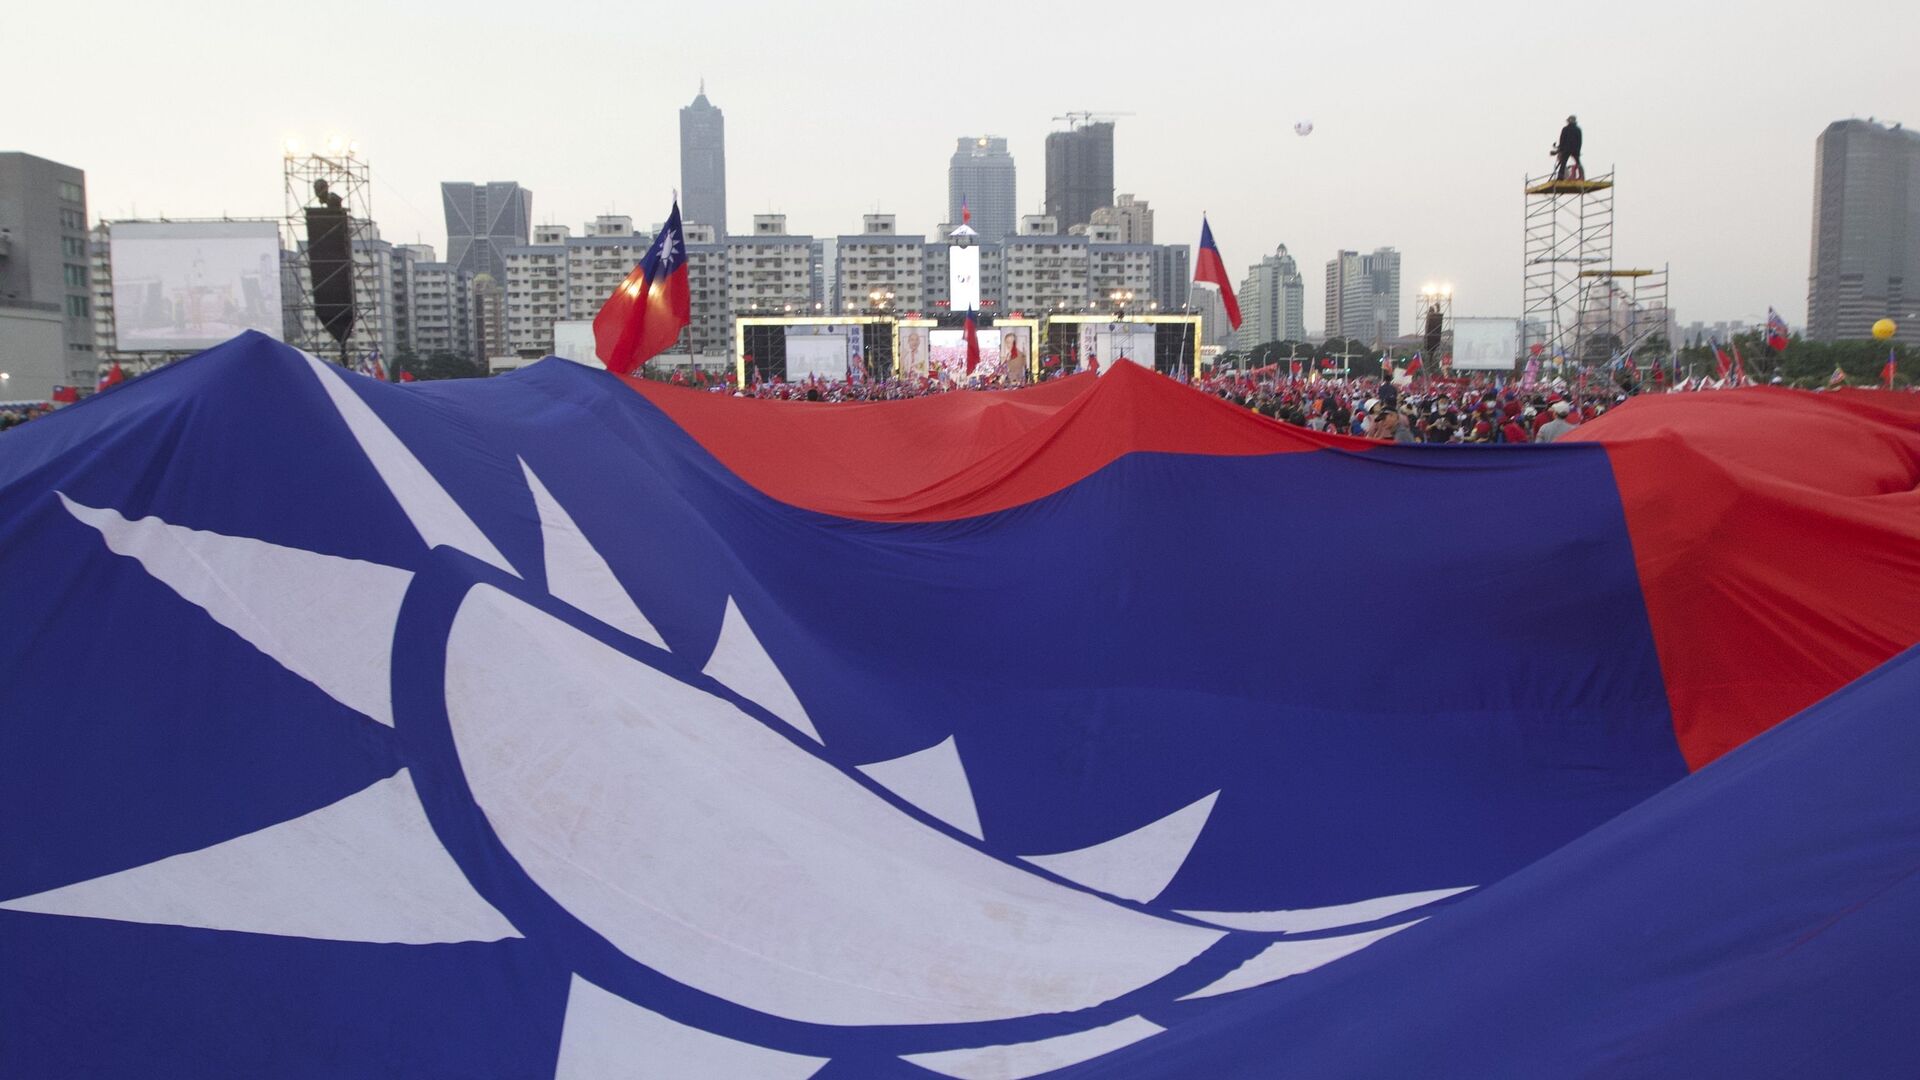 Supporters of Taiwan's 2020 presidential election candidate for the KMT, or Nationalist Party, Han Kuo-yu pass along a giant Taiwanese flag for the start of a campaign rally in southern Taiwan's Kaohsiung city on Friday, Jan 10, 2020 - Sputnik International, 1920, 28.04.2022